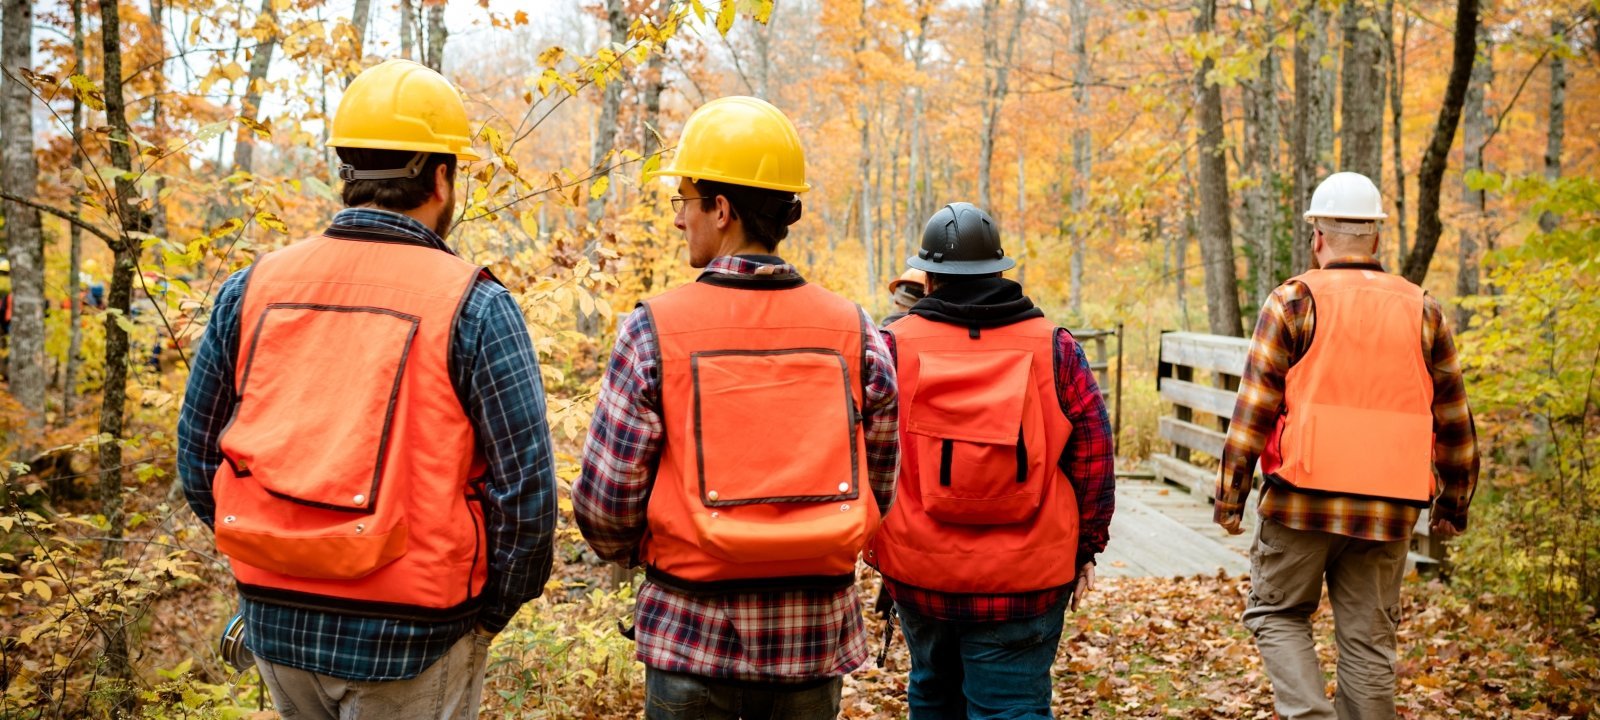 Group of people wearing backpacks and hard hats walking in the woods